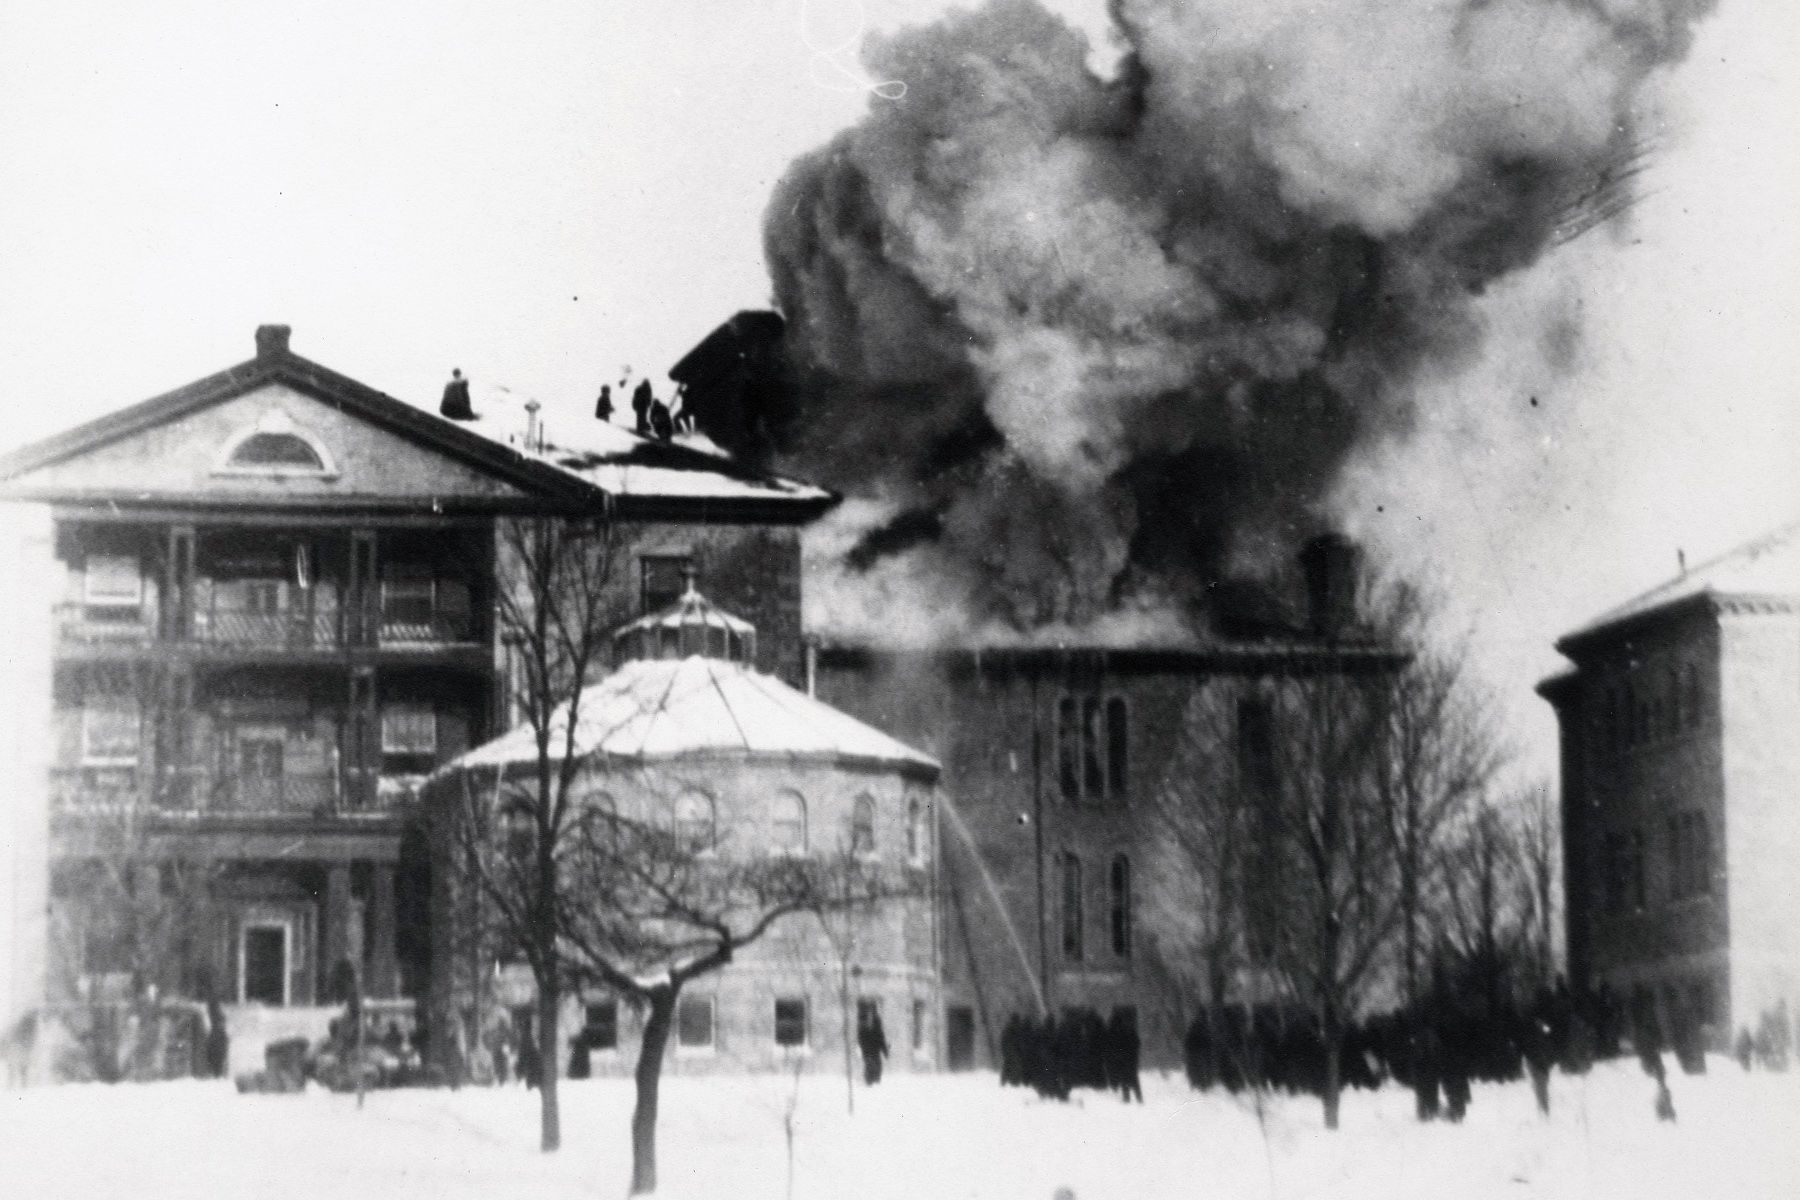 Fire engulfs the Watkins Wing in 1897. Firemen and volunteers managed to save the main building by passing buckets of water.